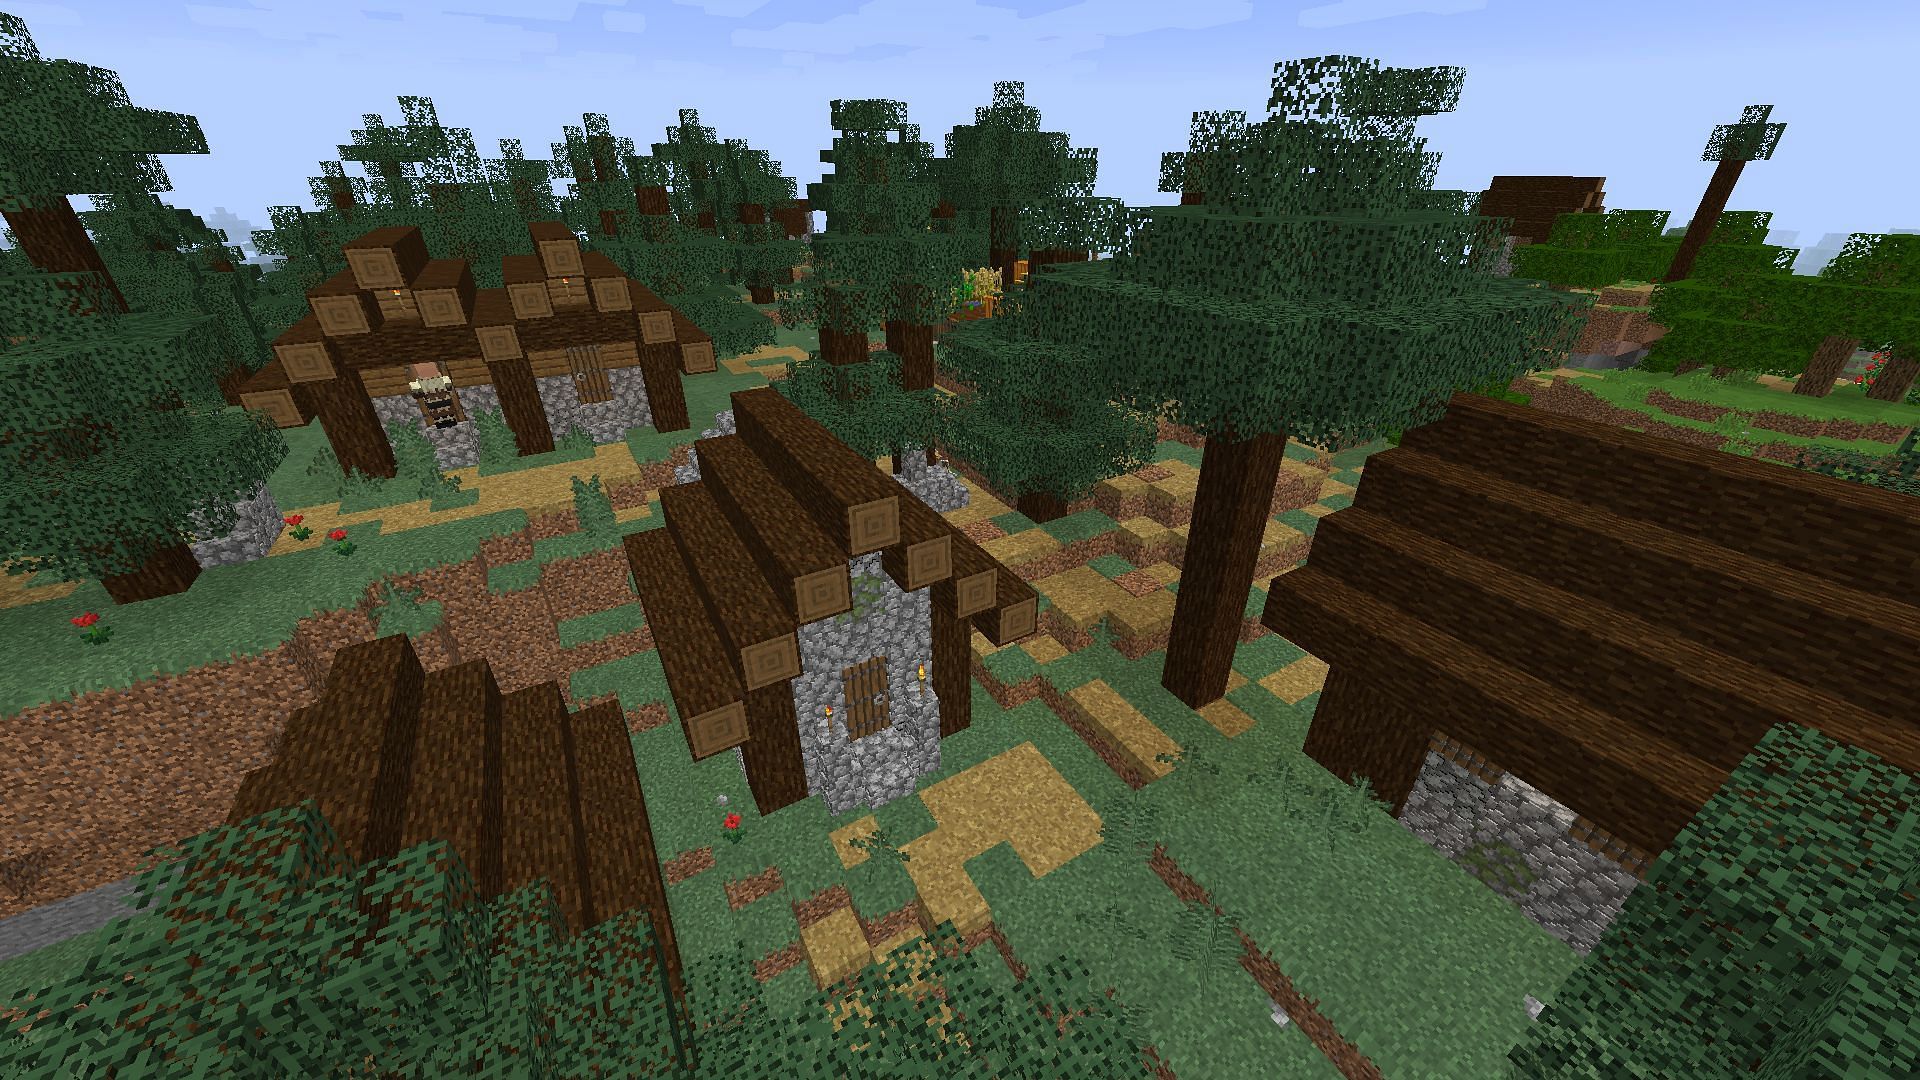 The village with the Default3D texture pack on (Image via Minecraft)